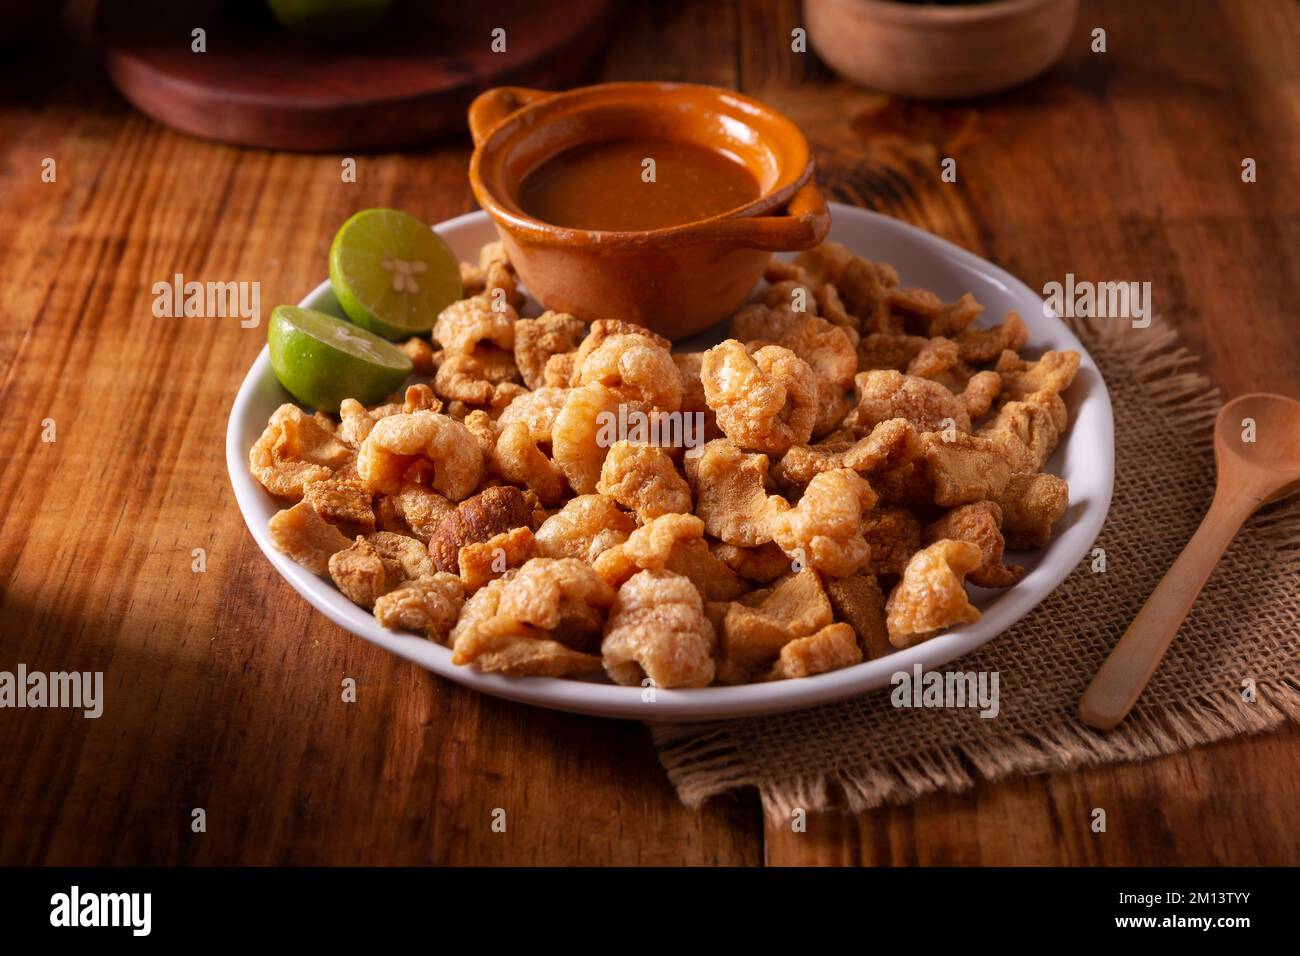 Chicharrones. Deep fried pork rinds, crispy pork skin pieces, traditional mexican ingredient or snack served with lemon juice and red hot chili sauce. Stock Photo